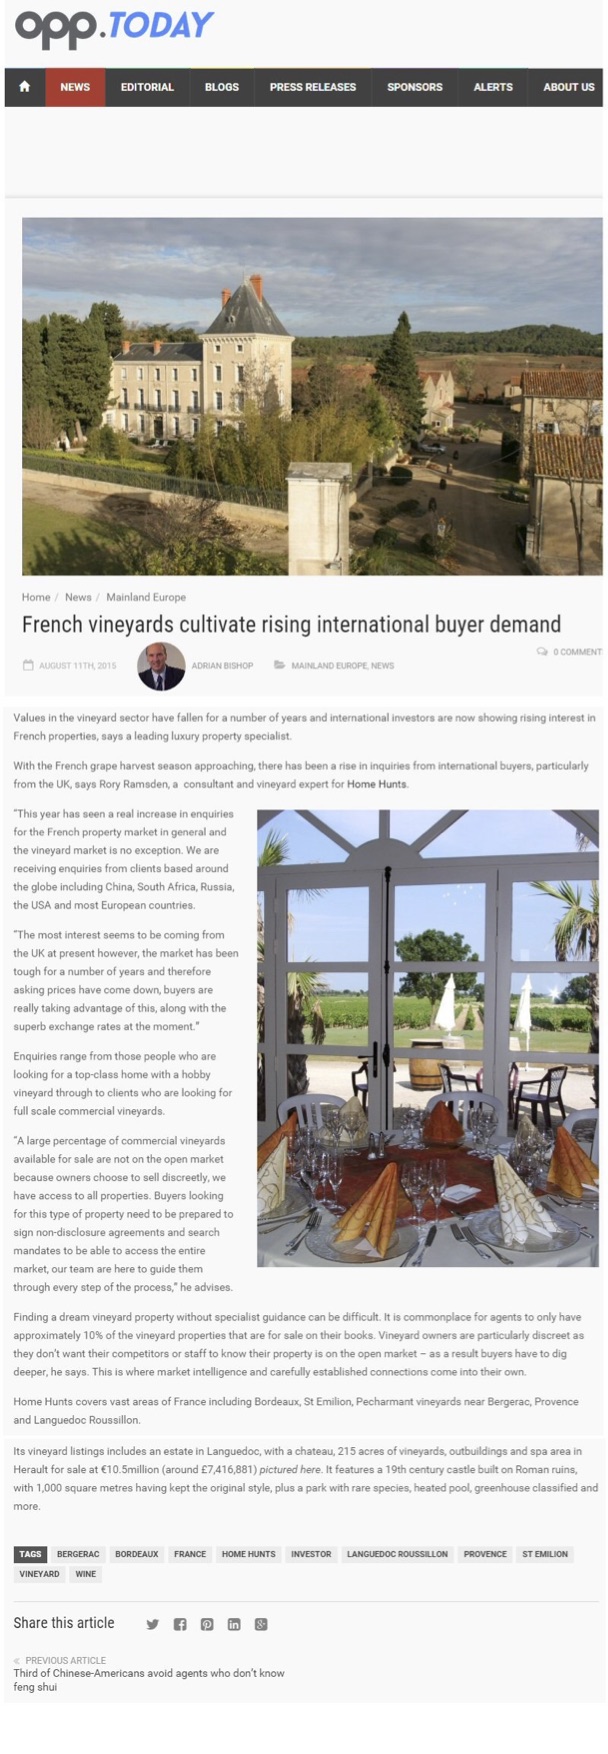 OPP Today – Interest in purchasing French vineyards on the rise….